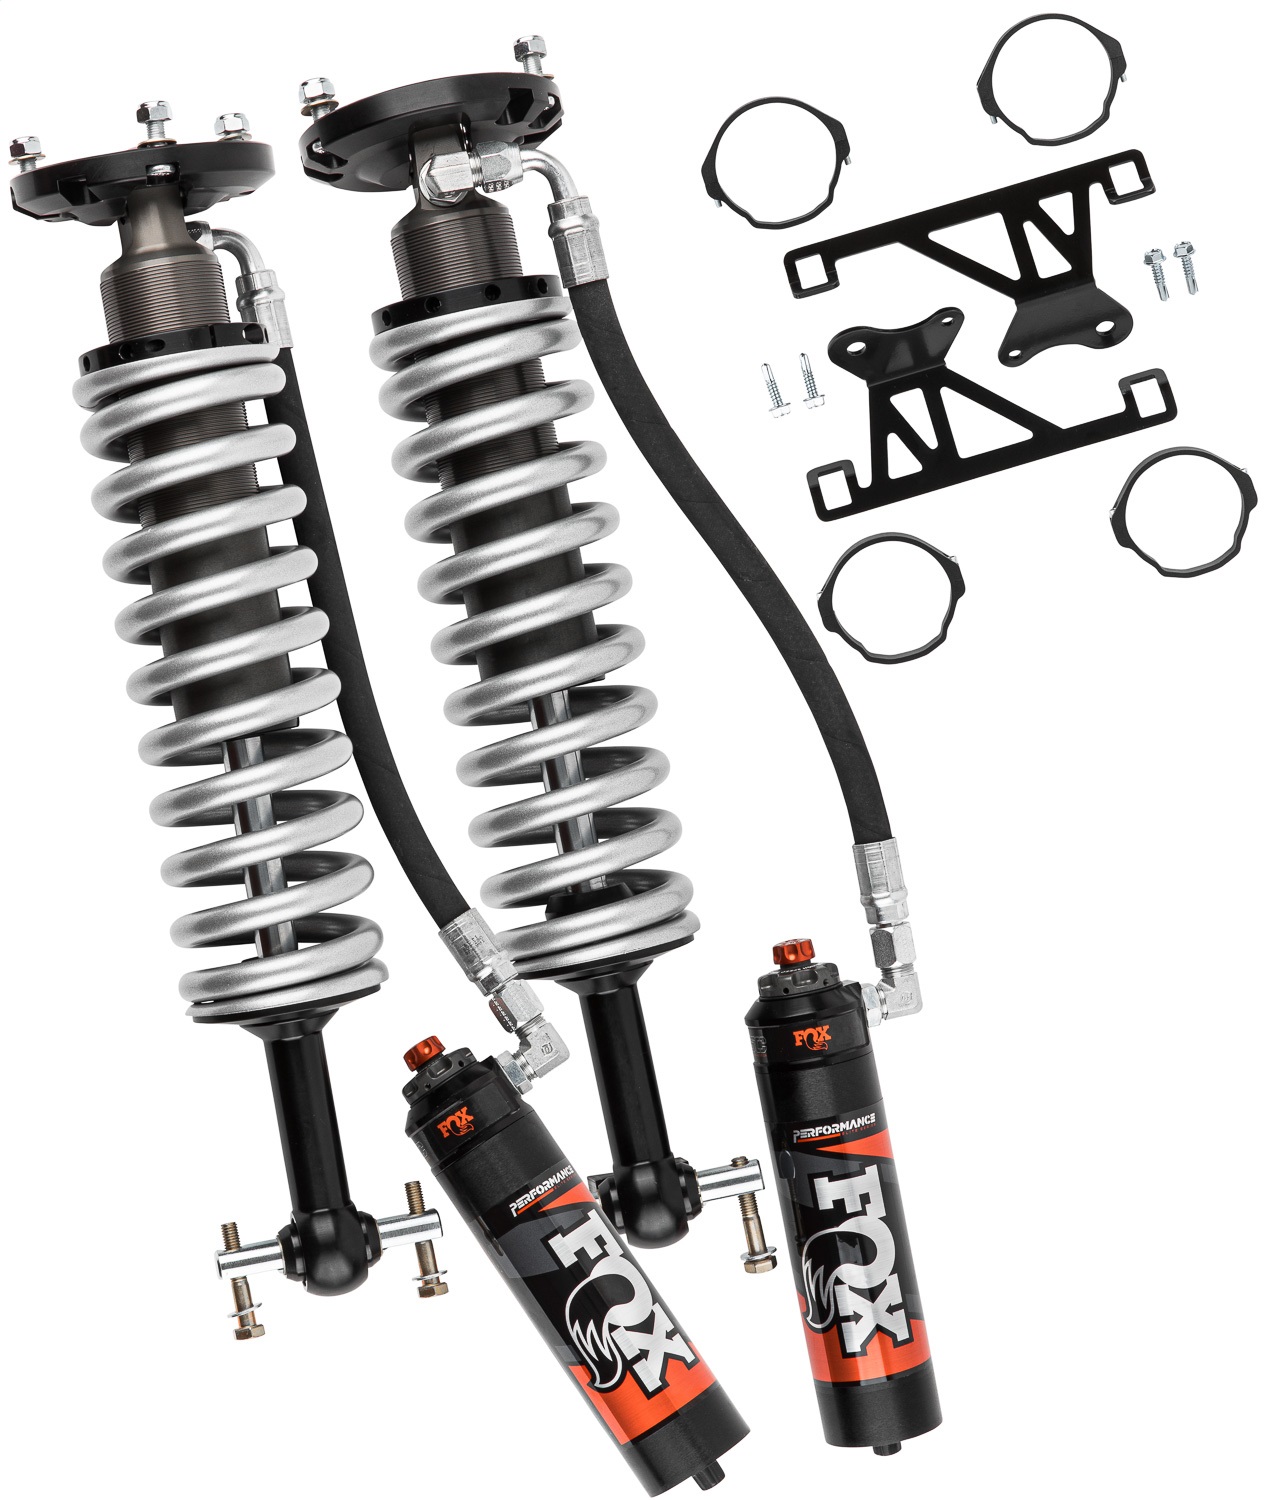 FOX Offroad Shocks 883-06-162 Coil Over Shock Absorber